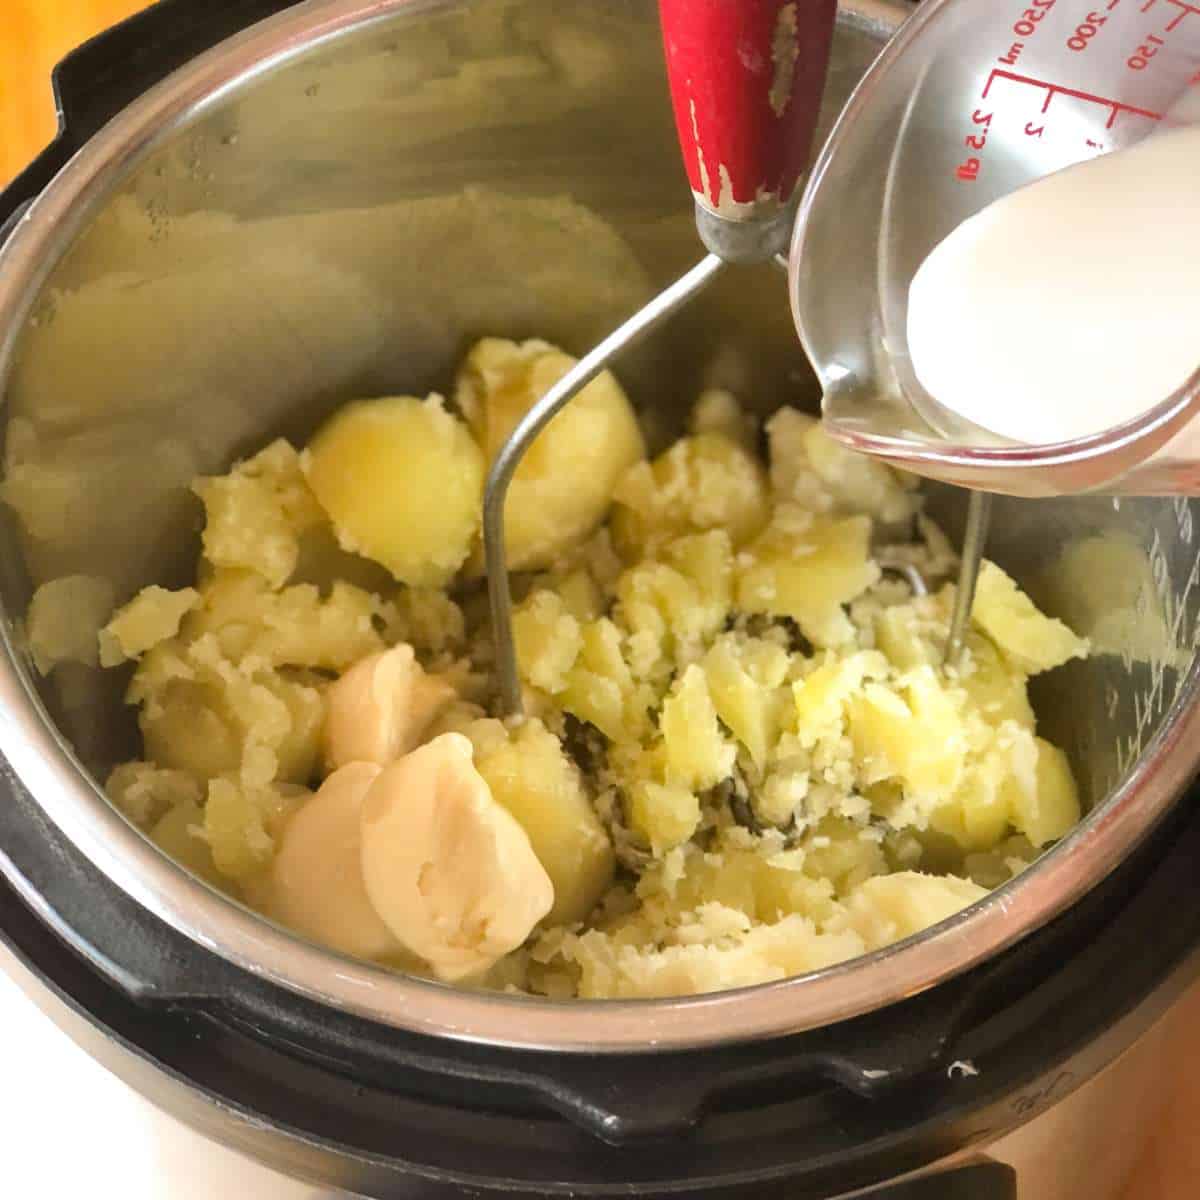 Mashed potatoes with dairy free margarine in a pot with a glass measuring cup of dairy free milk being poured onto the potatoes.